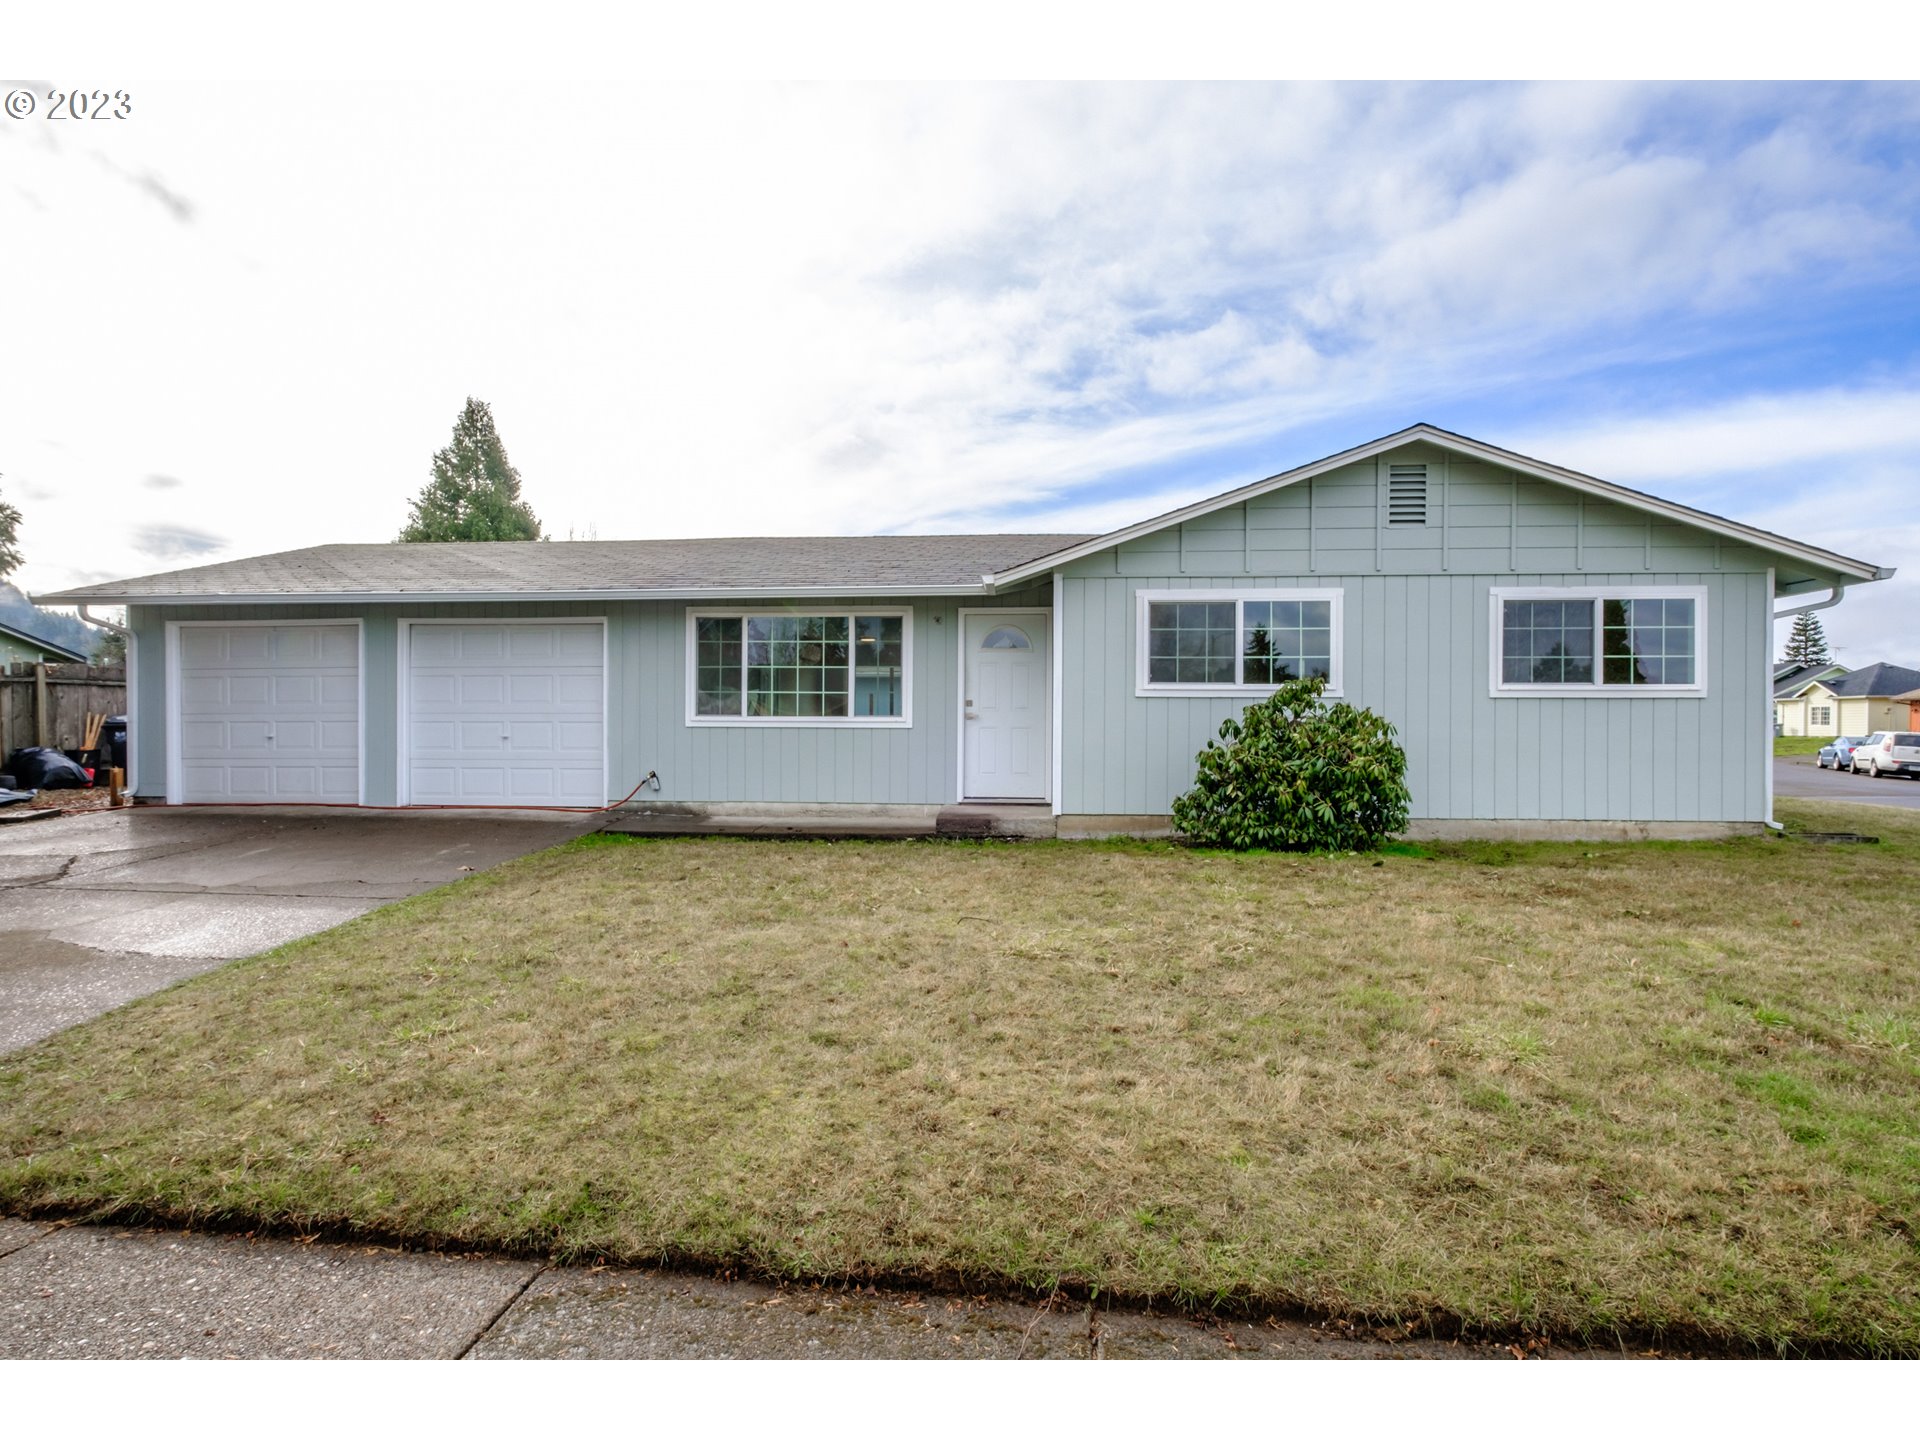 5355 D ST, Springfield, OR 97478